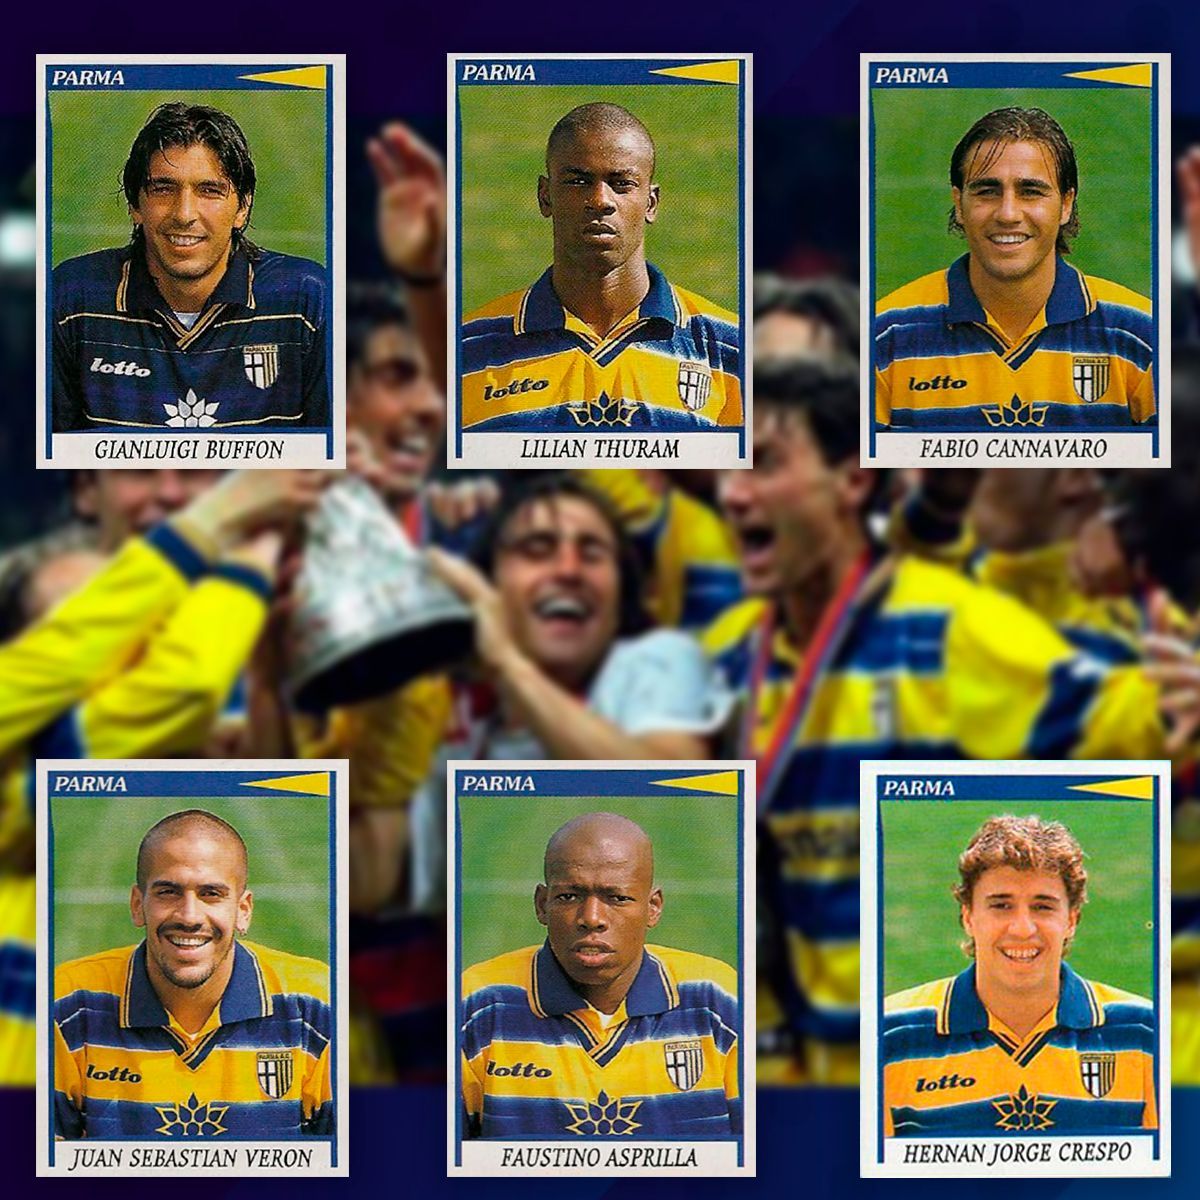 🏆 On this day in 1999, Parma clinched the UEFA Cup with a 3-0 victory over Marseille. Let's celebrate this historic moment and look forward to Parma's return to Serie A next season! ⚽🎉 #Panini #Parma #UEFAEuropaLeague #FootballHistory